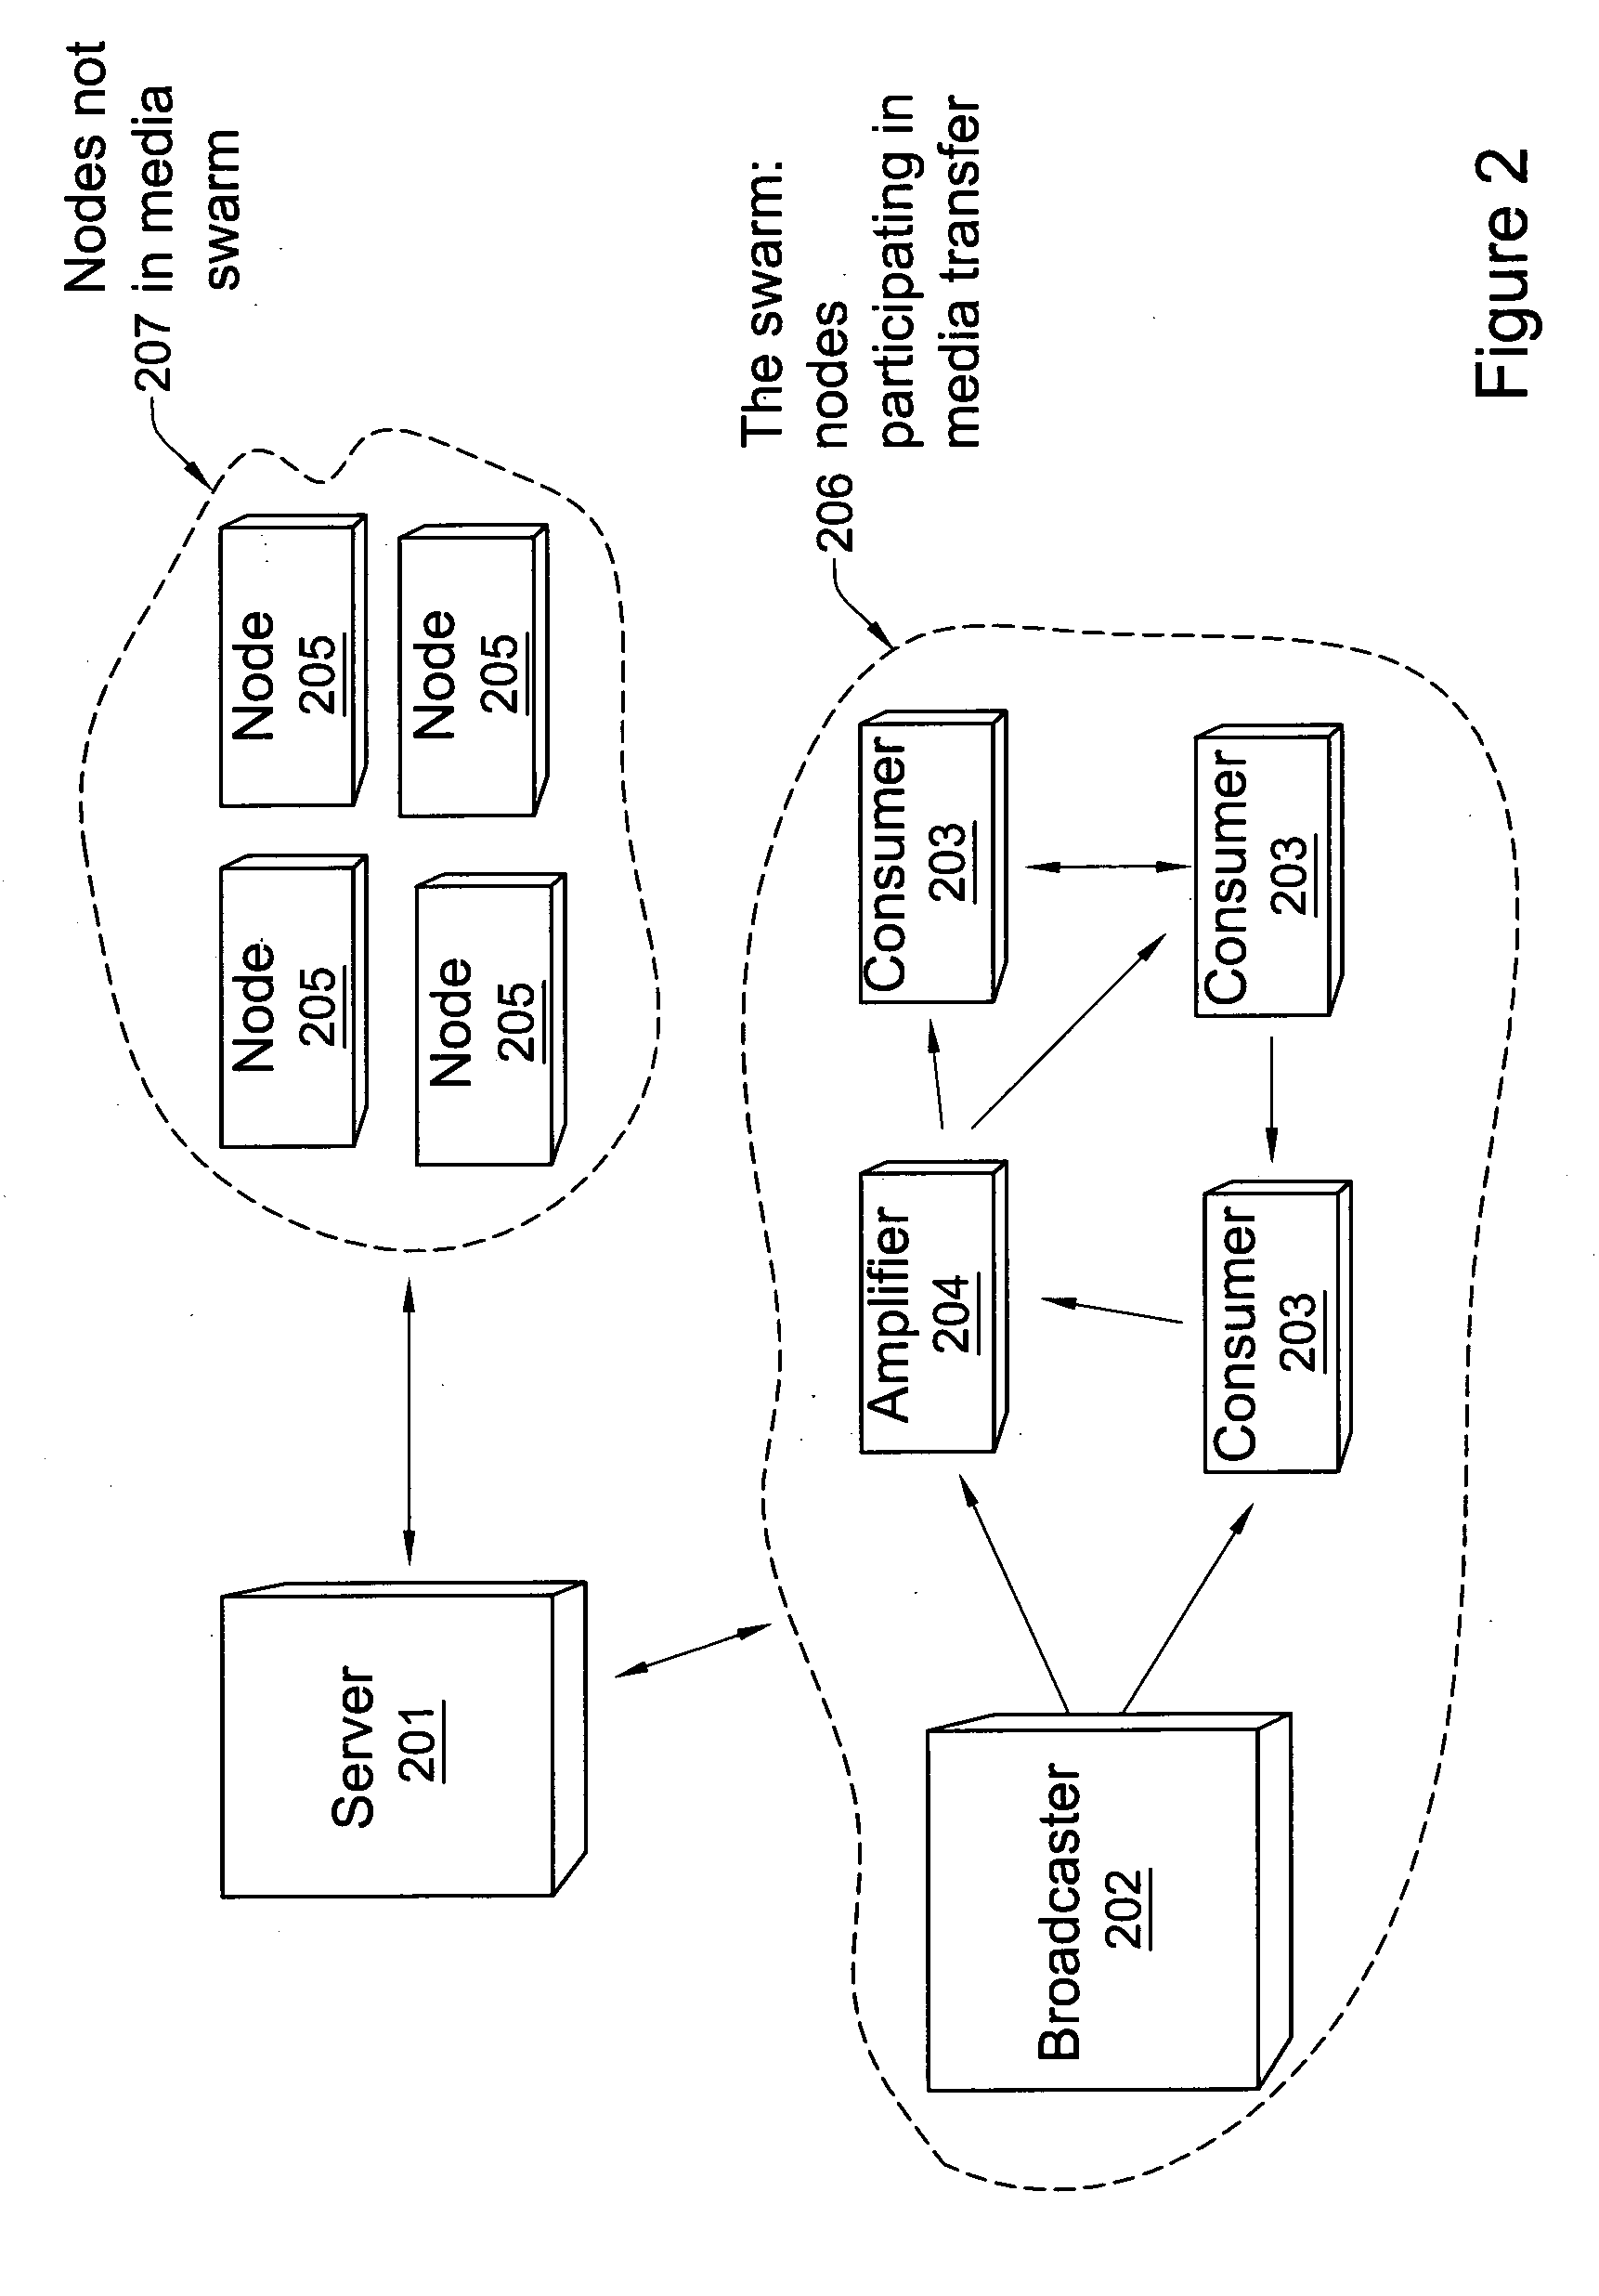 System and methods for peer-to-peer media streaming